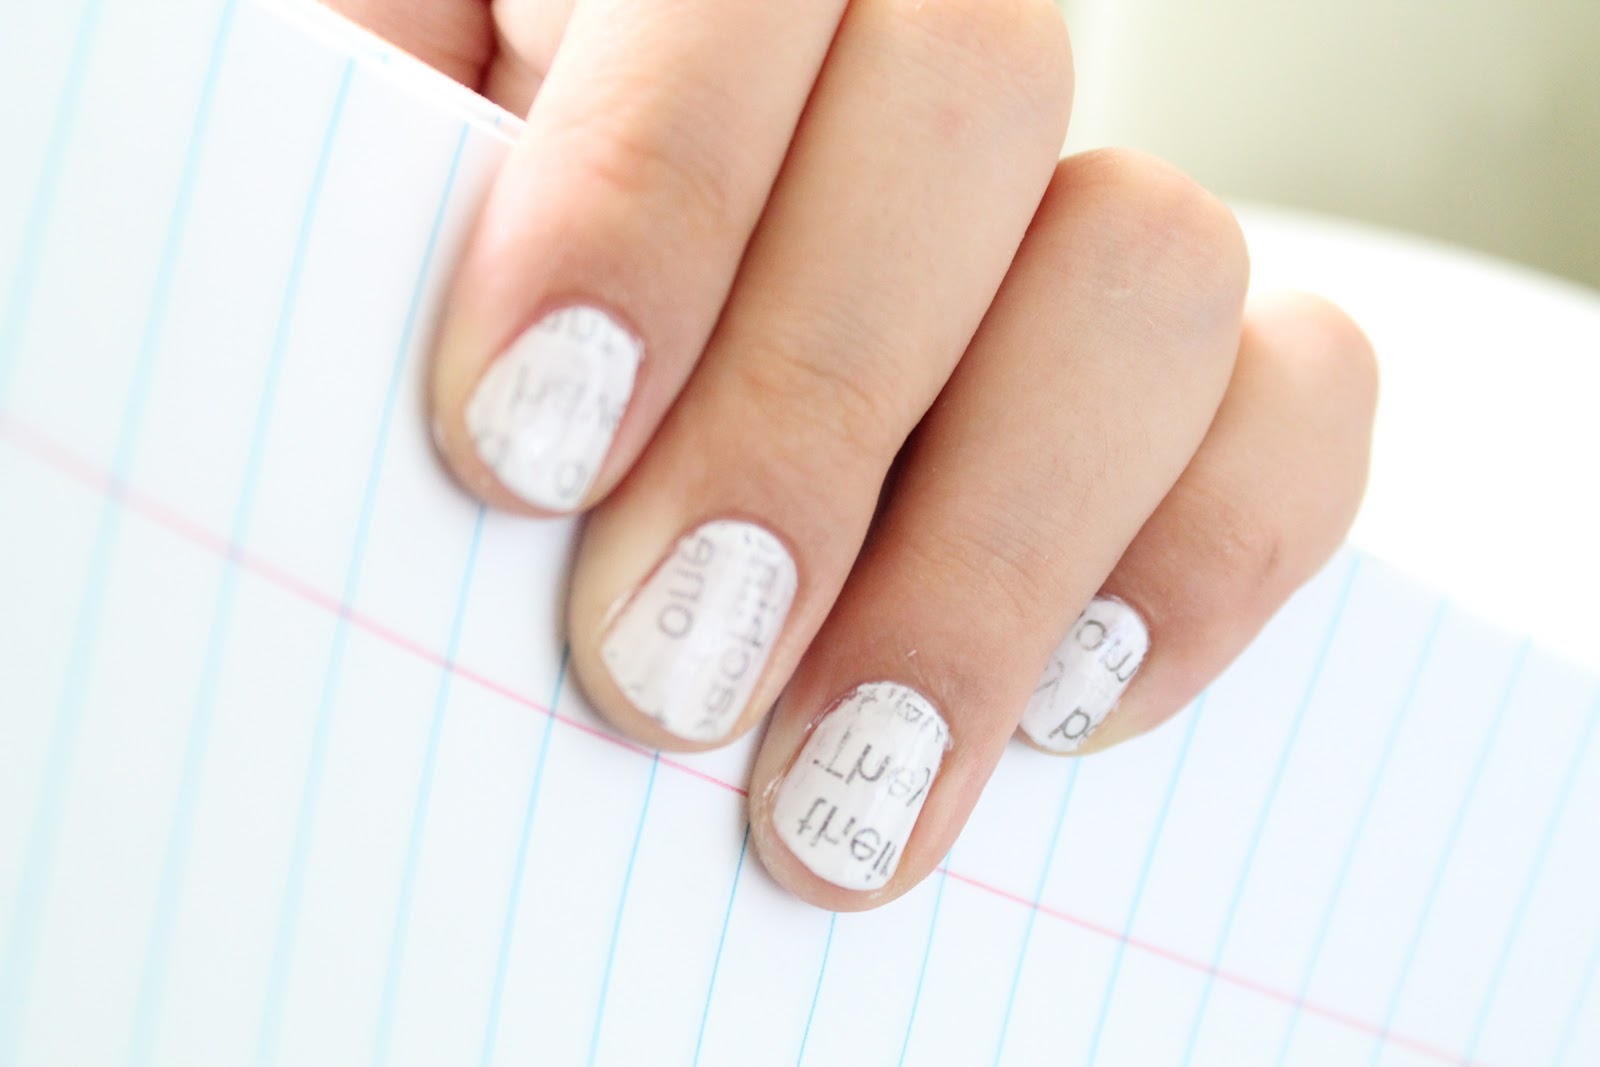 How To Make Newspaper Nails Without Alcohol